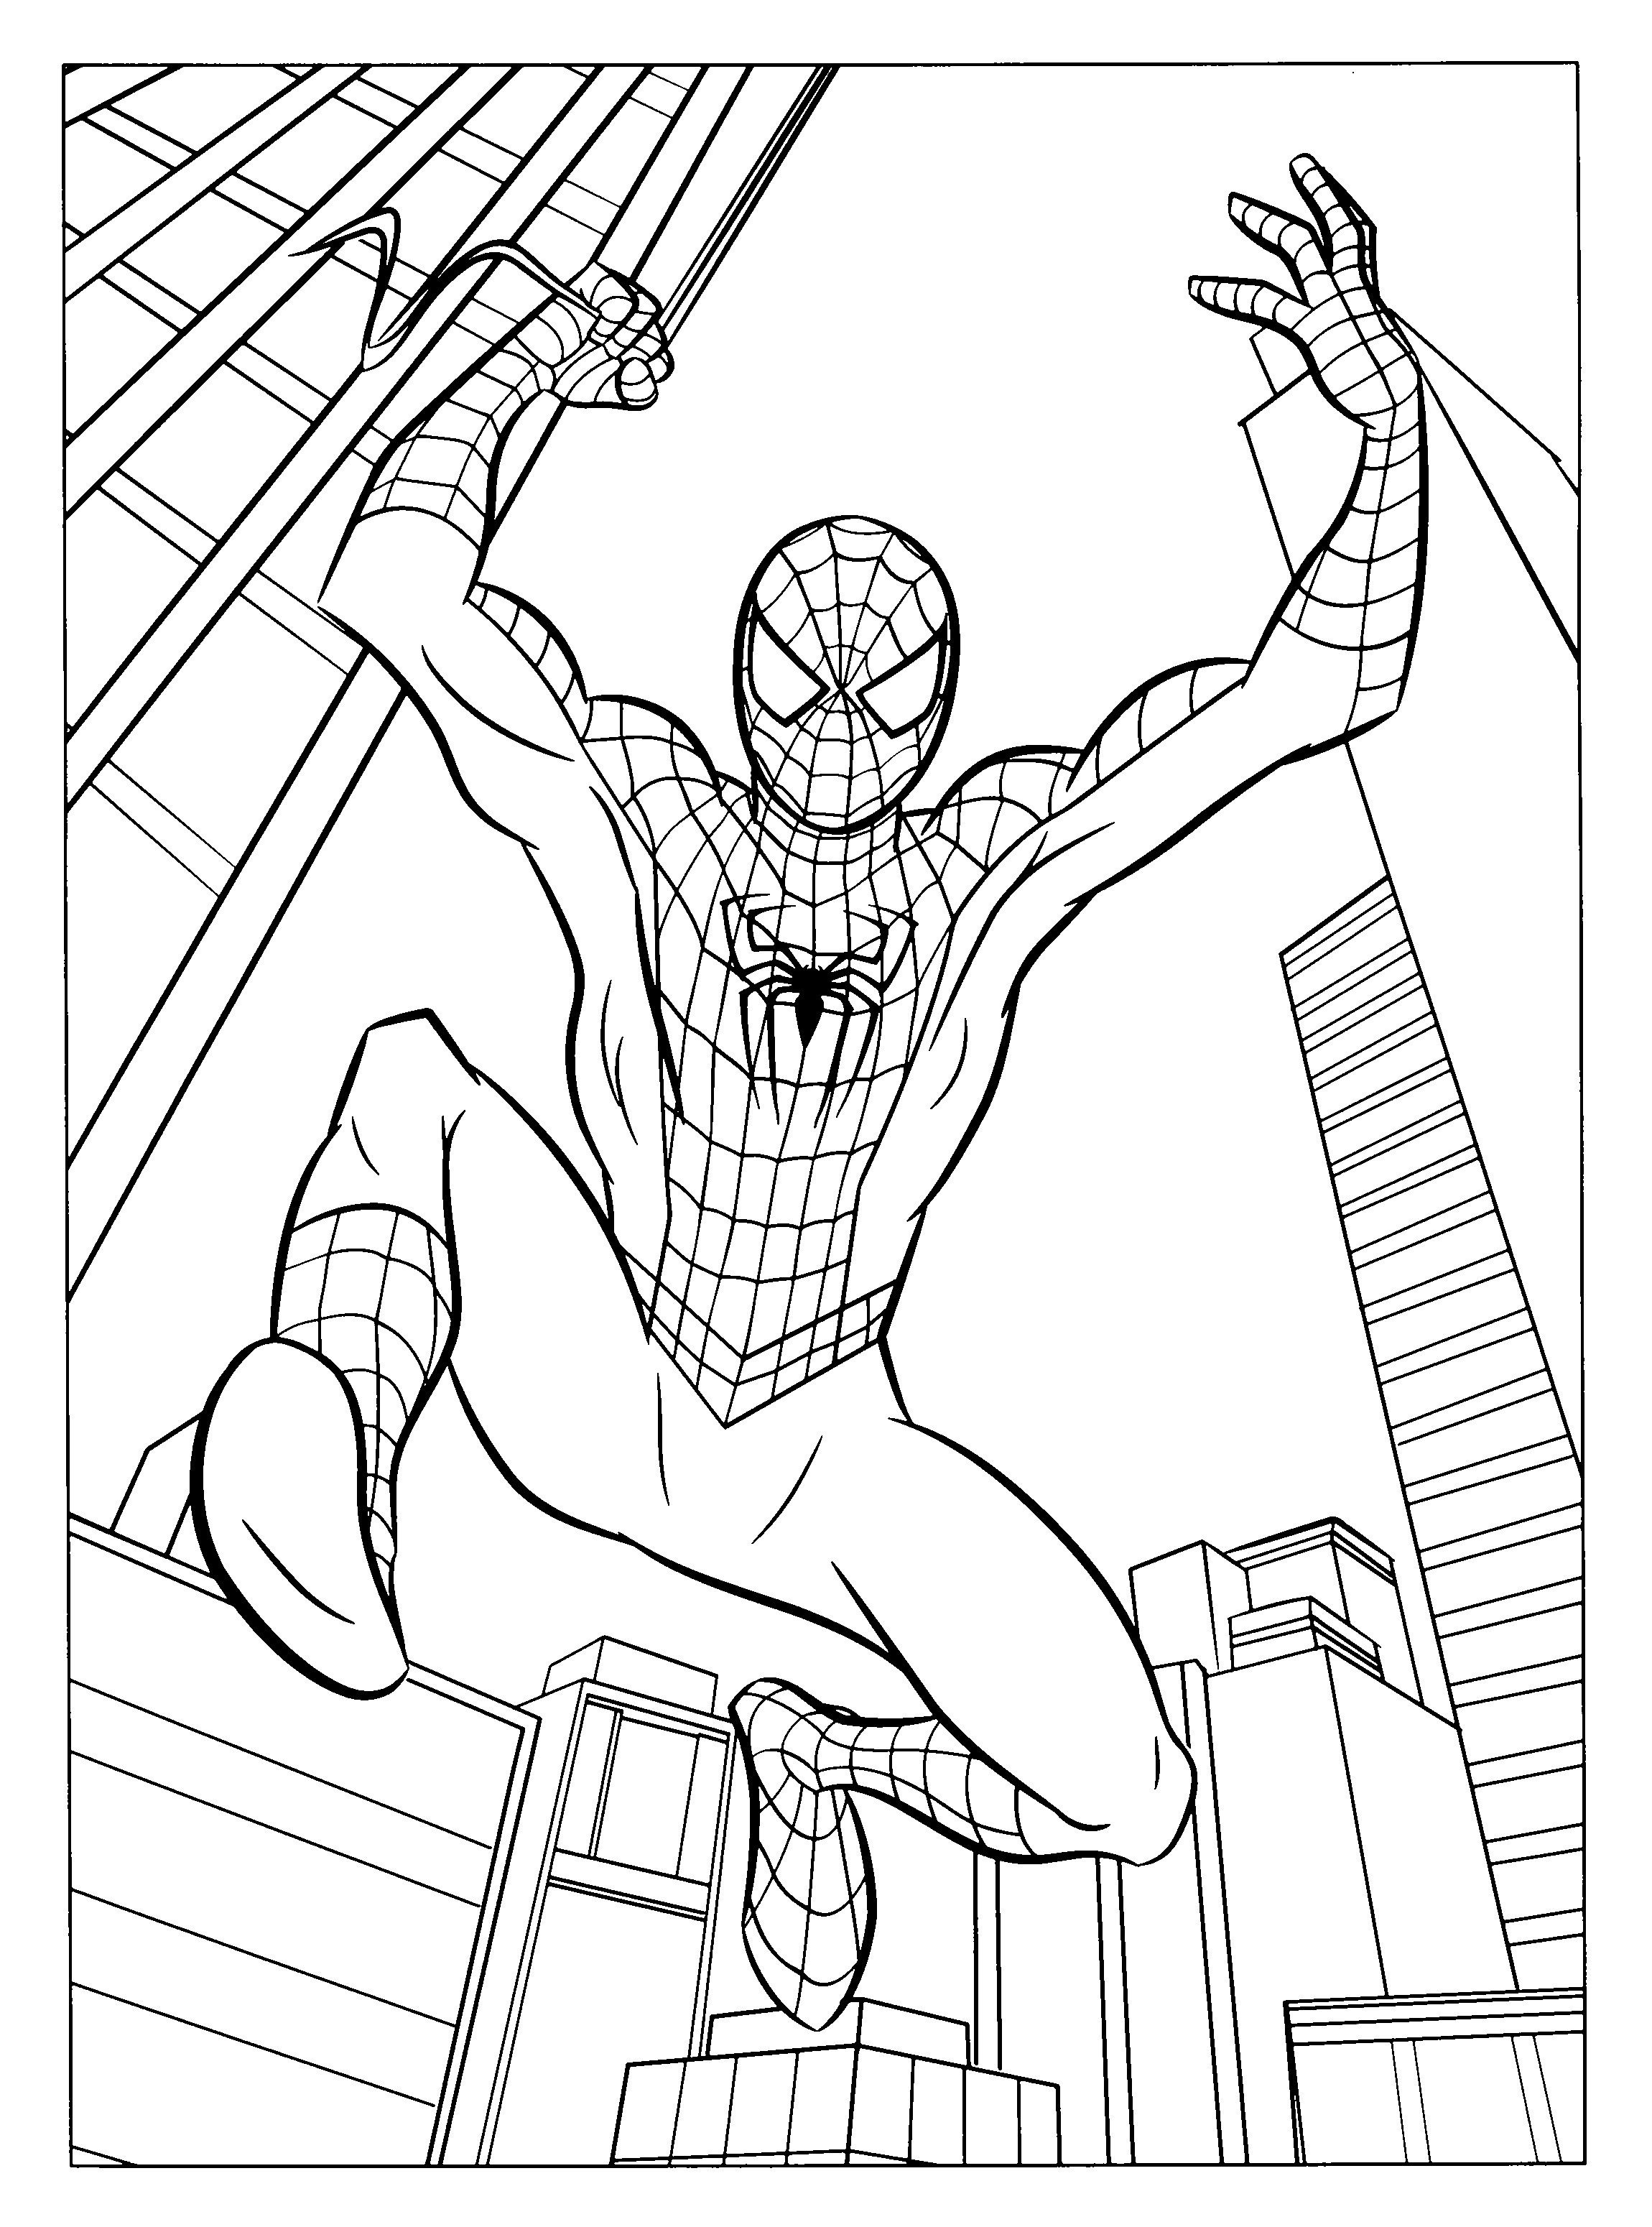 Free Printable Spiderman Coloring Pages For Kids   Free ...